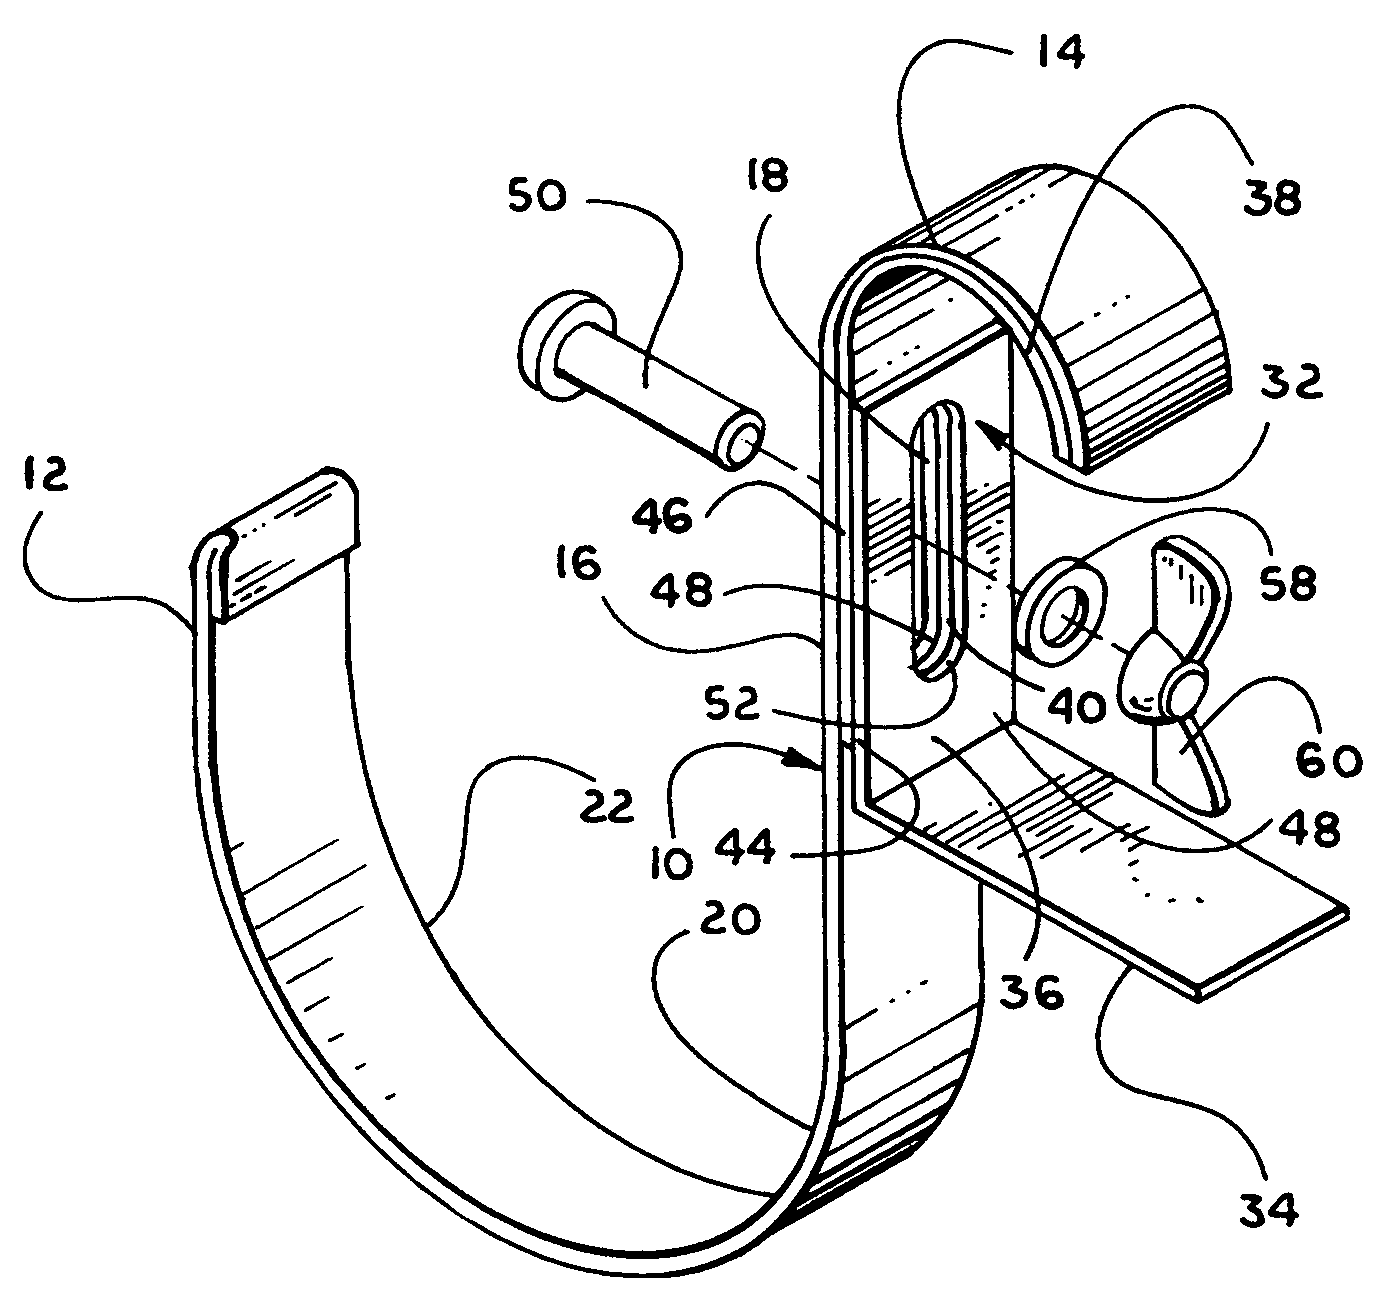 Clamping device for stainless steel sinks